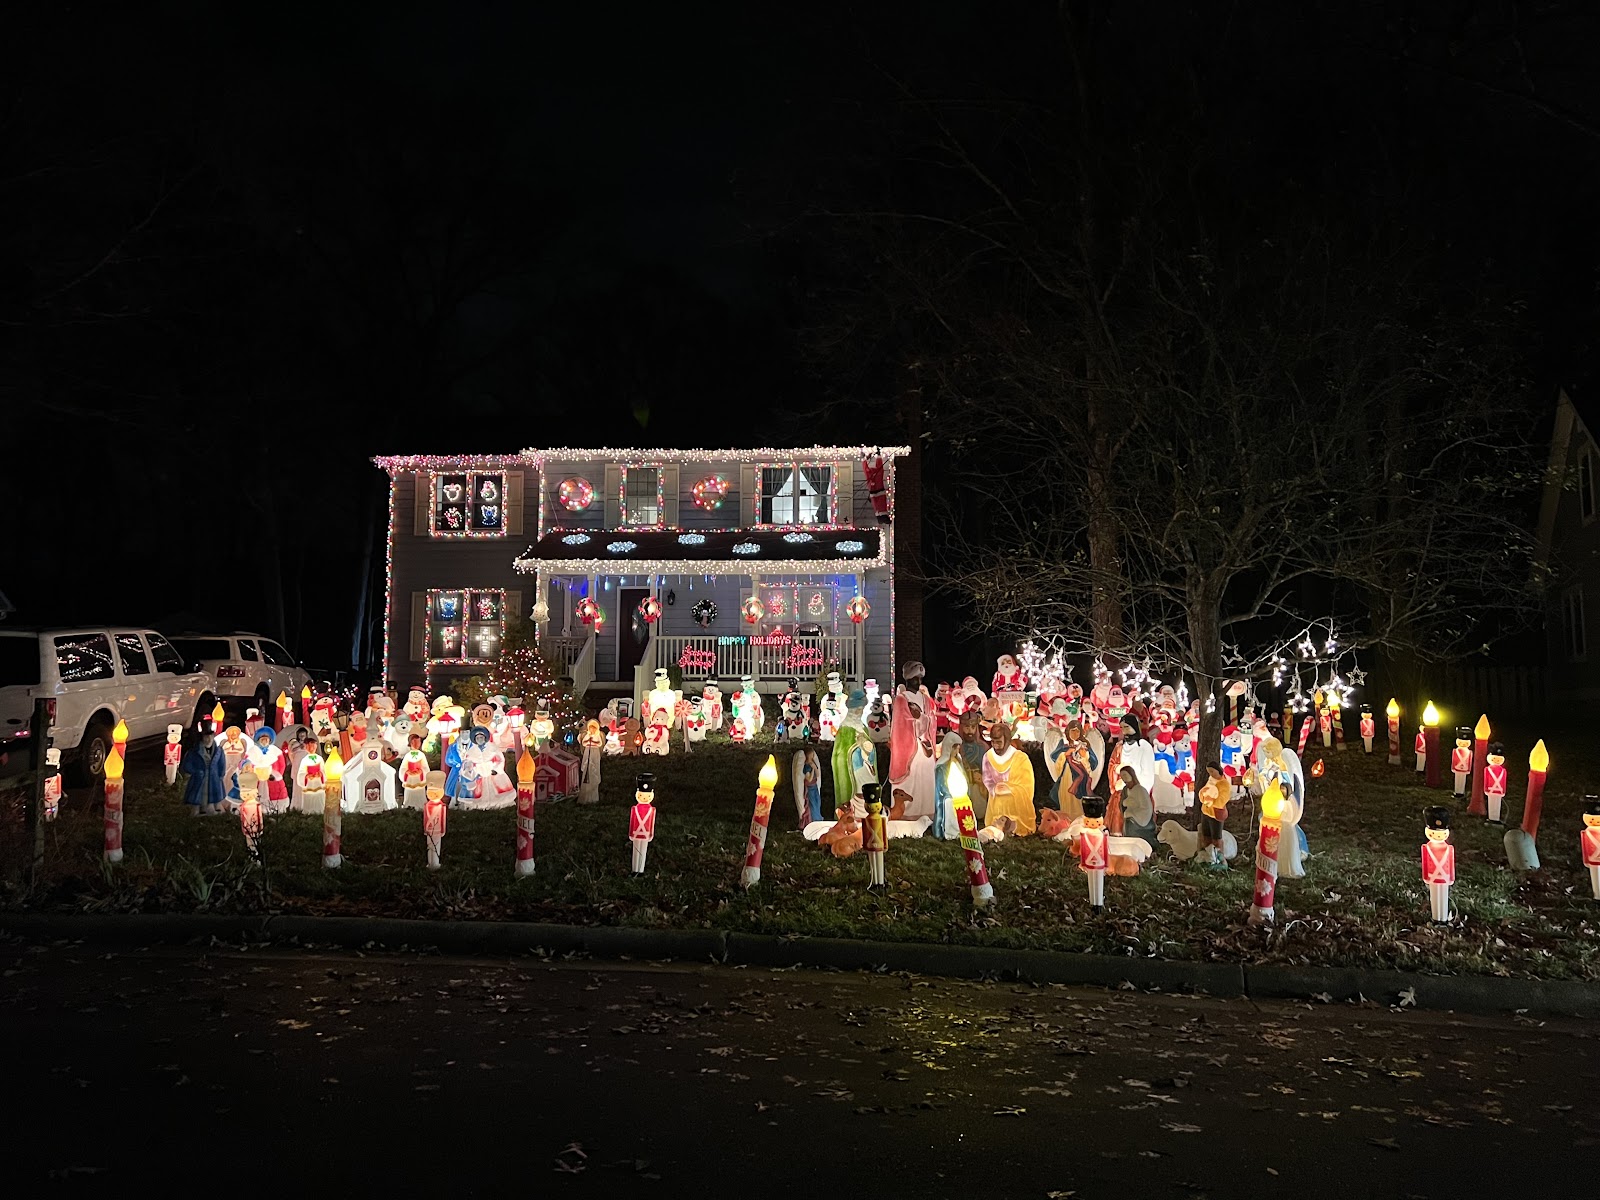 Located off of NW Maynard Road , this house boasts inflatables on the ground as well as lights and wreaths on the house.